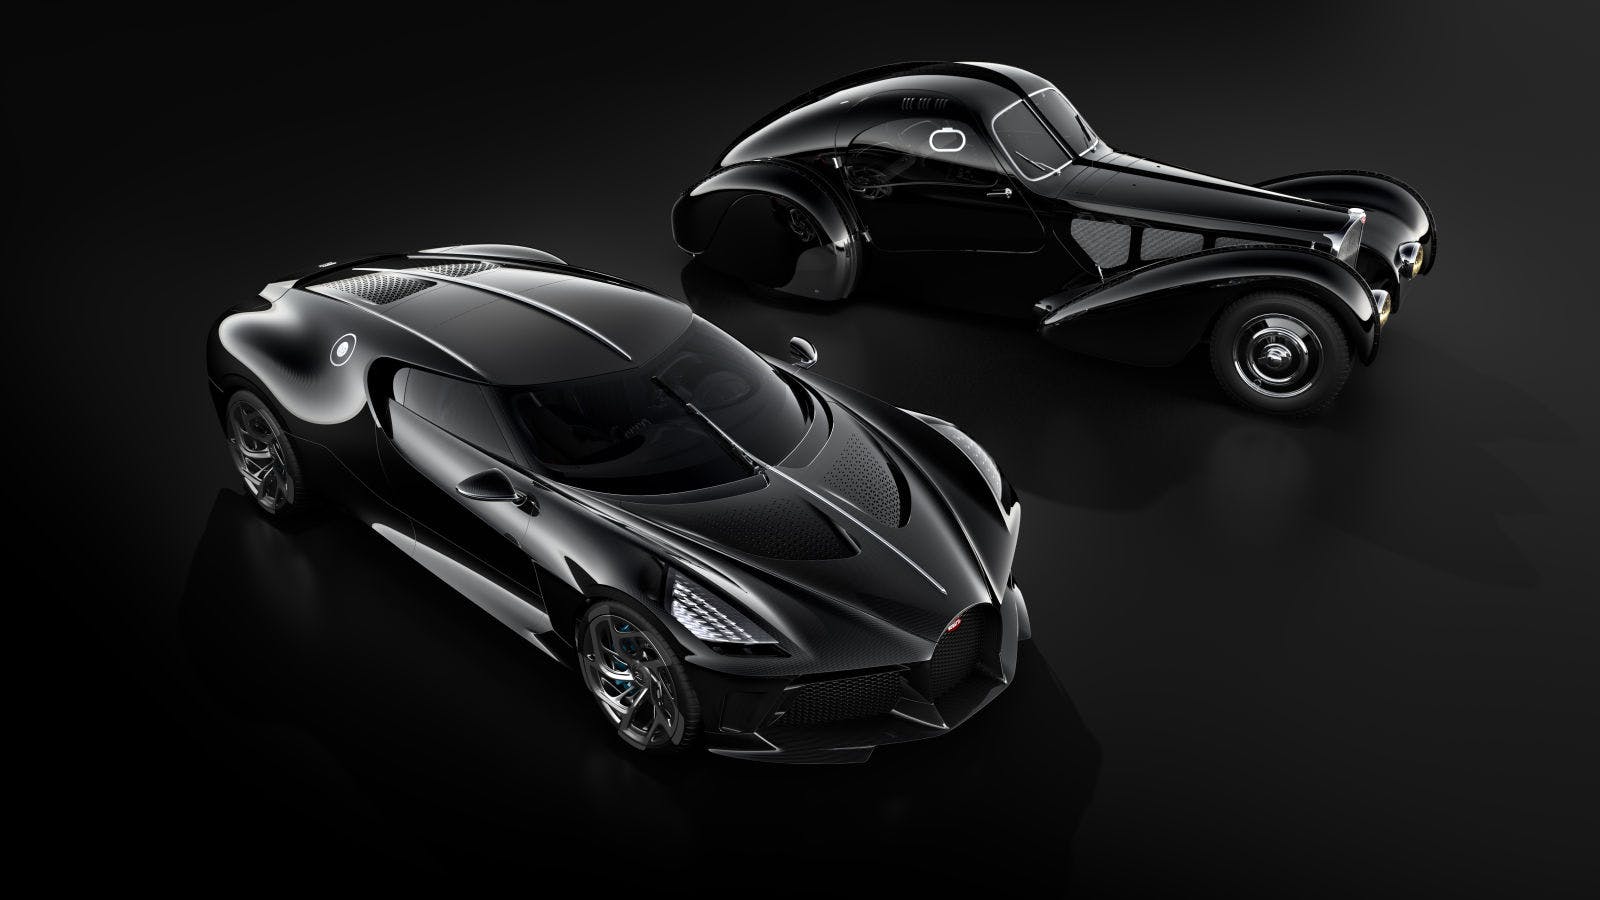 To pay homage to the legendary Type 57 SC Atlantic, Bugatti created the extraordinary La Voiture Noire.